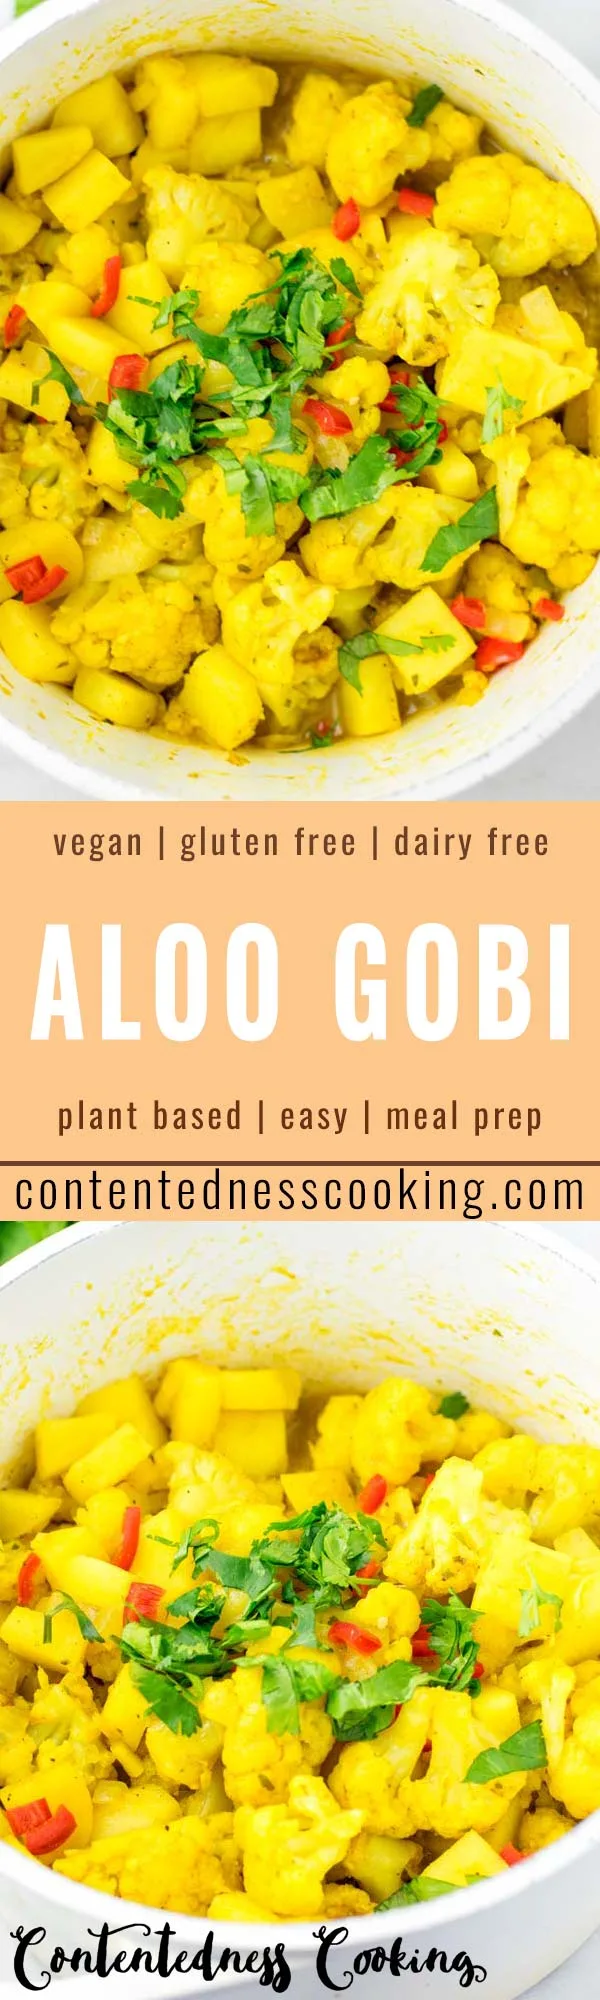 This Aloo Gobi is super easy to make in one pan and packed with so many amazing flavors! Naturally vegan and gluten free it is a keeper for everybody for dinner, lunch, meal prep and so much more. #vegan #dairyfree #glutenfree #vegetarian #onepotmeals #budgetmeals #aloogobi #dinner #lunch #mealprep #worklunchdeas #contentednesscooking 